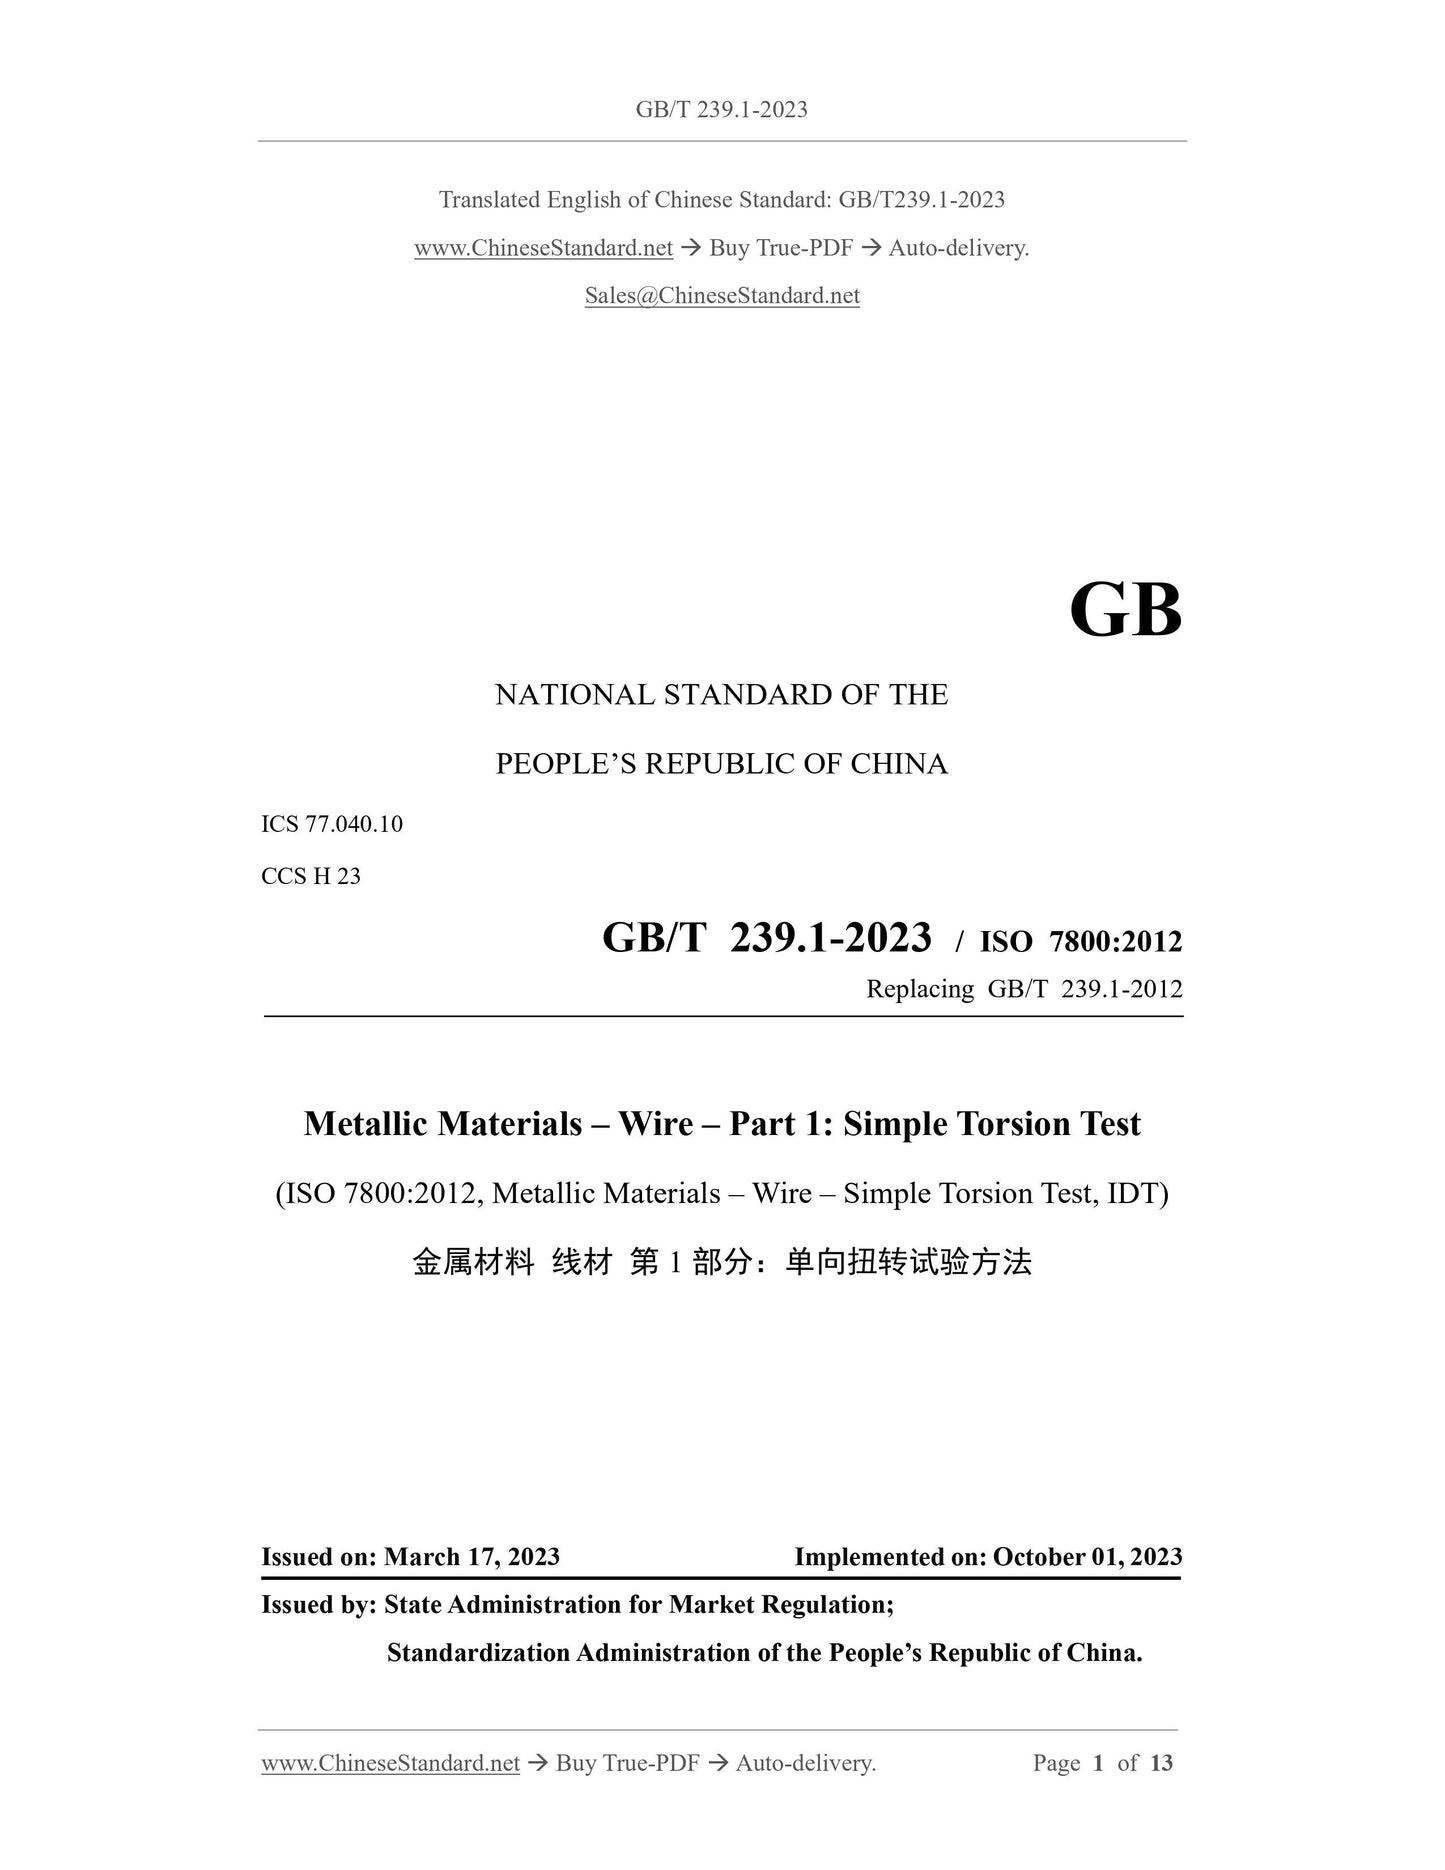 GB/T 239.1-2023 Page 1